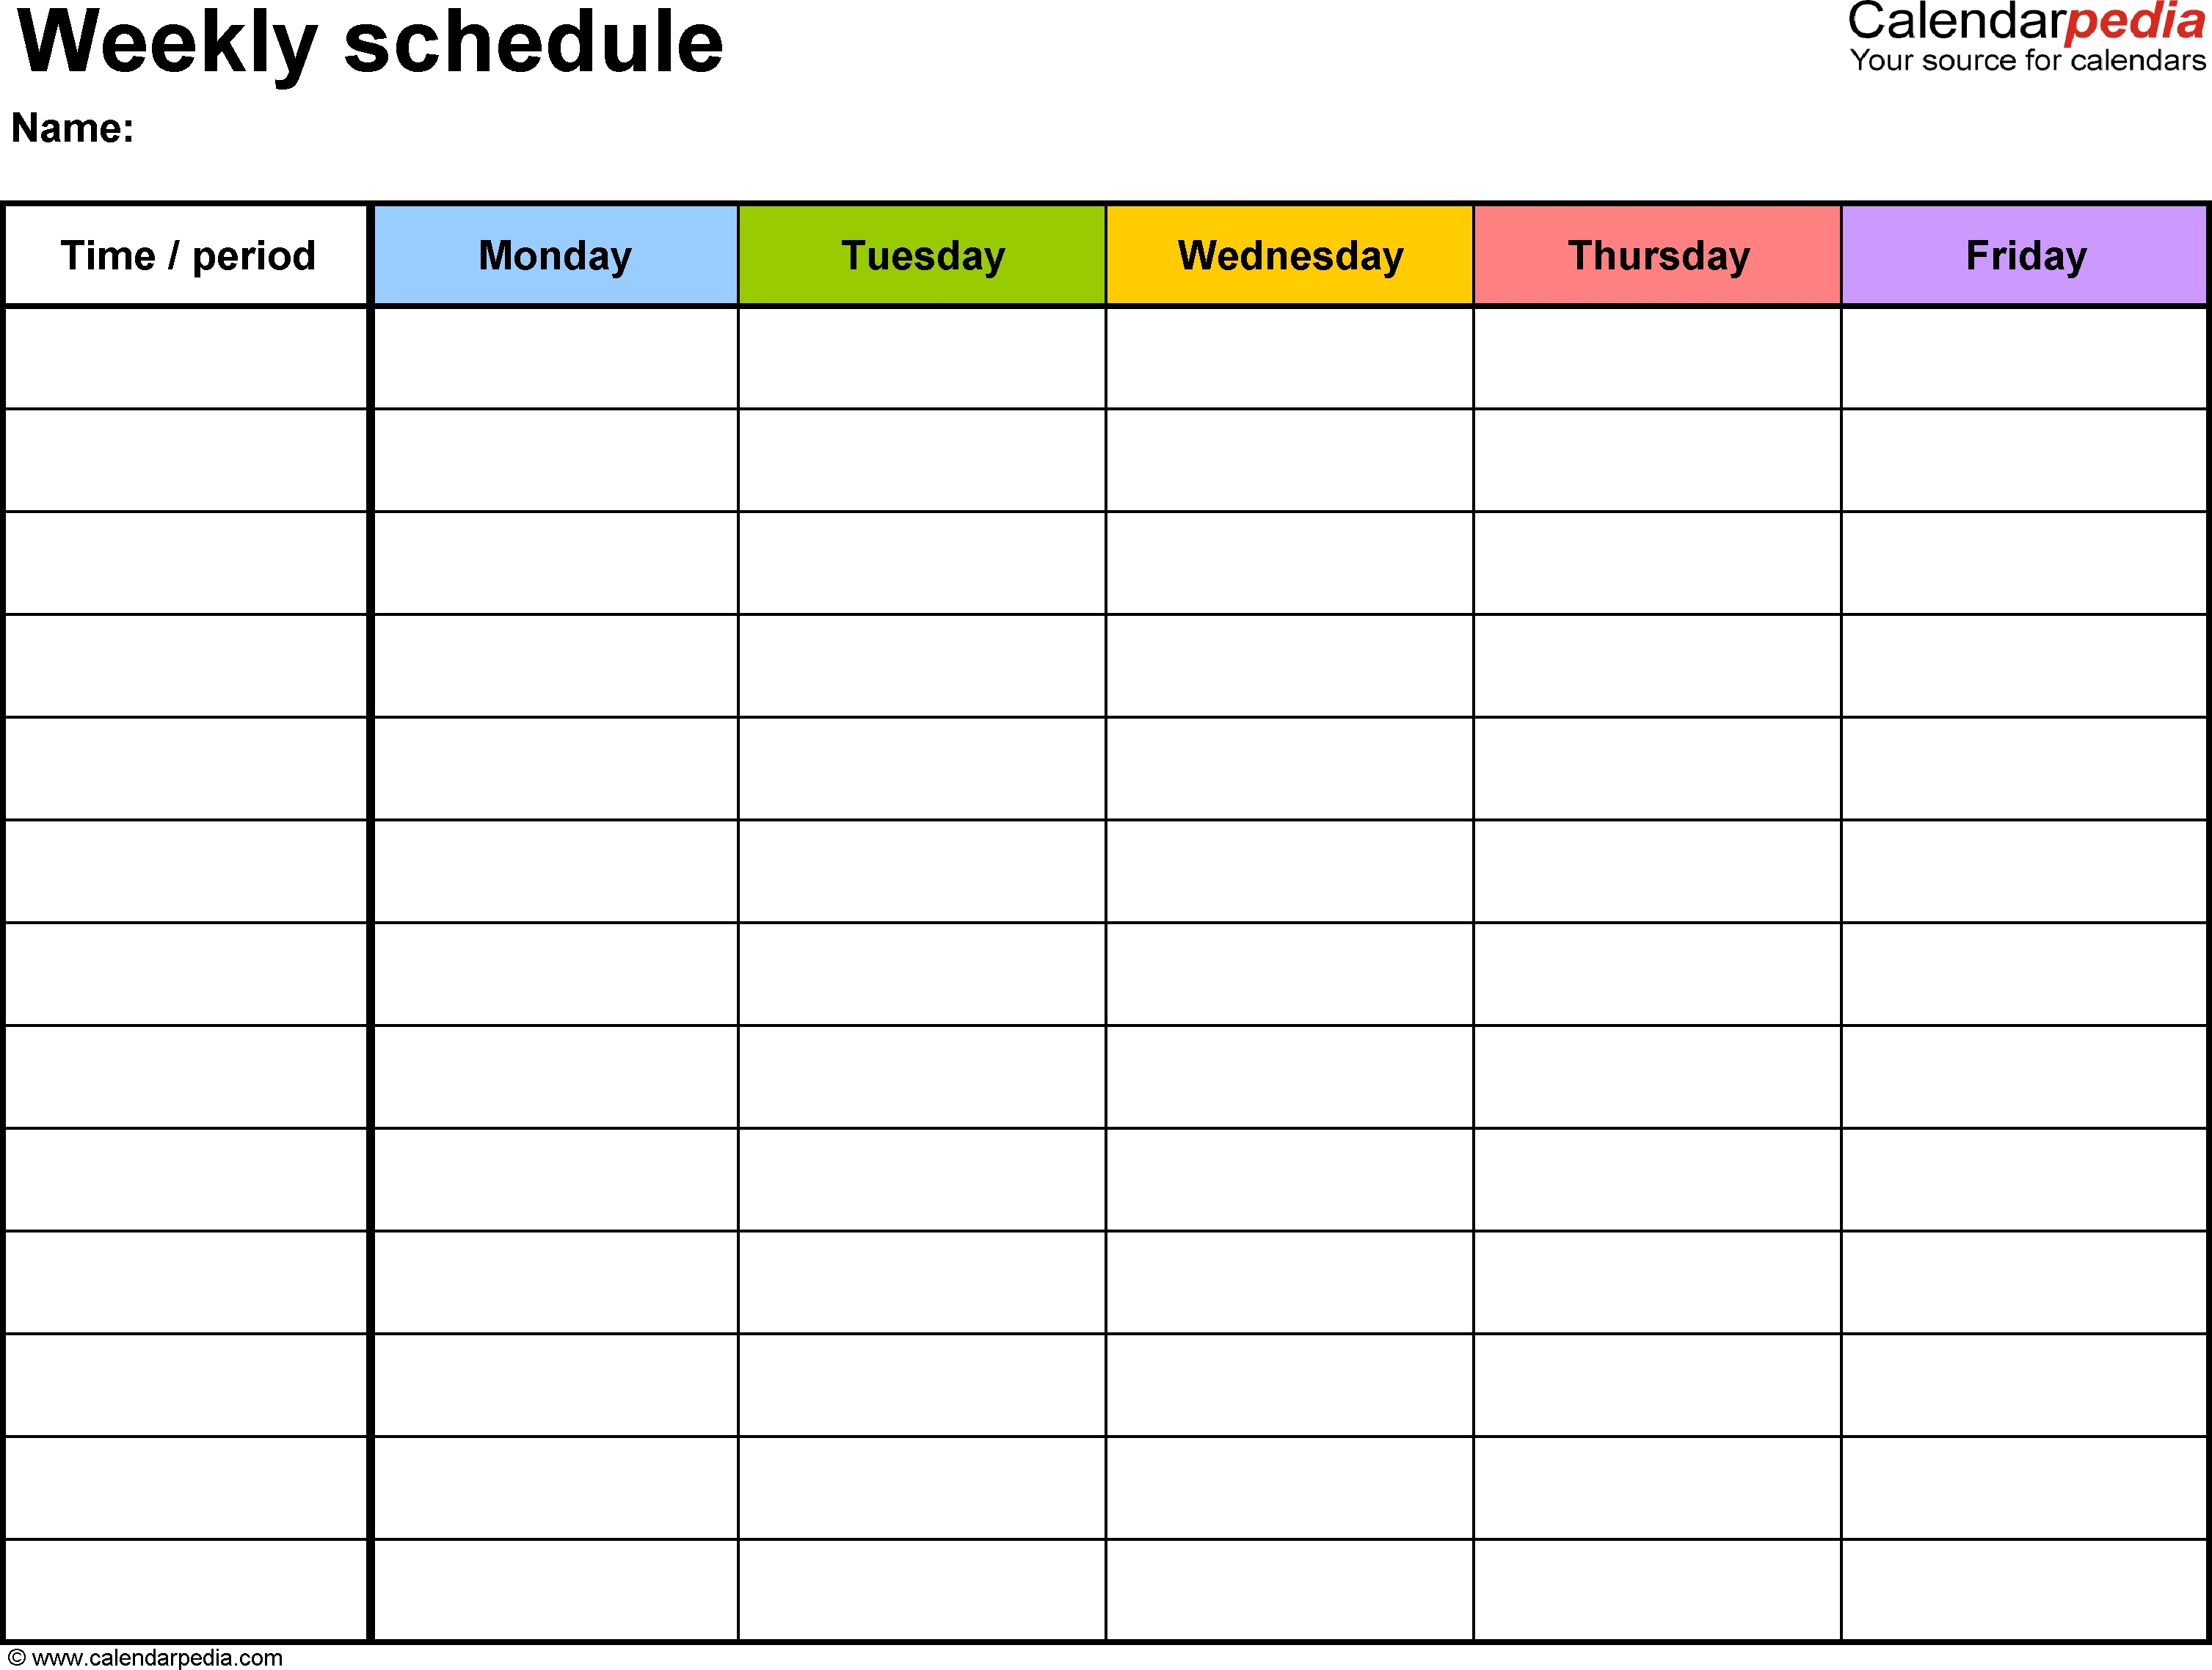 Free Weekly Schedule Templates For Word - 18 Templates-Monthly Monday To Friday Calendar